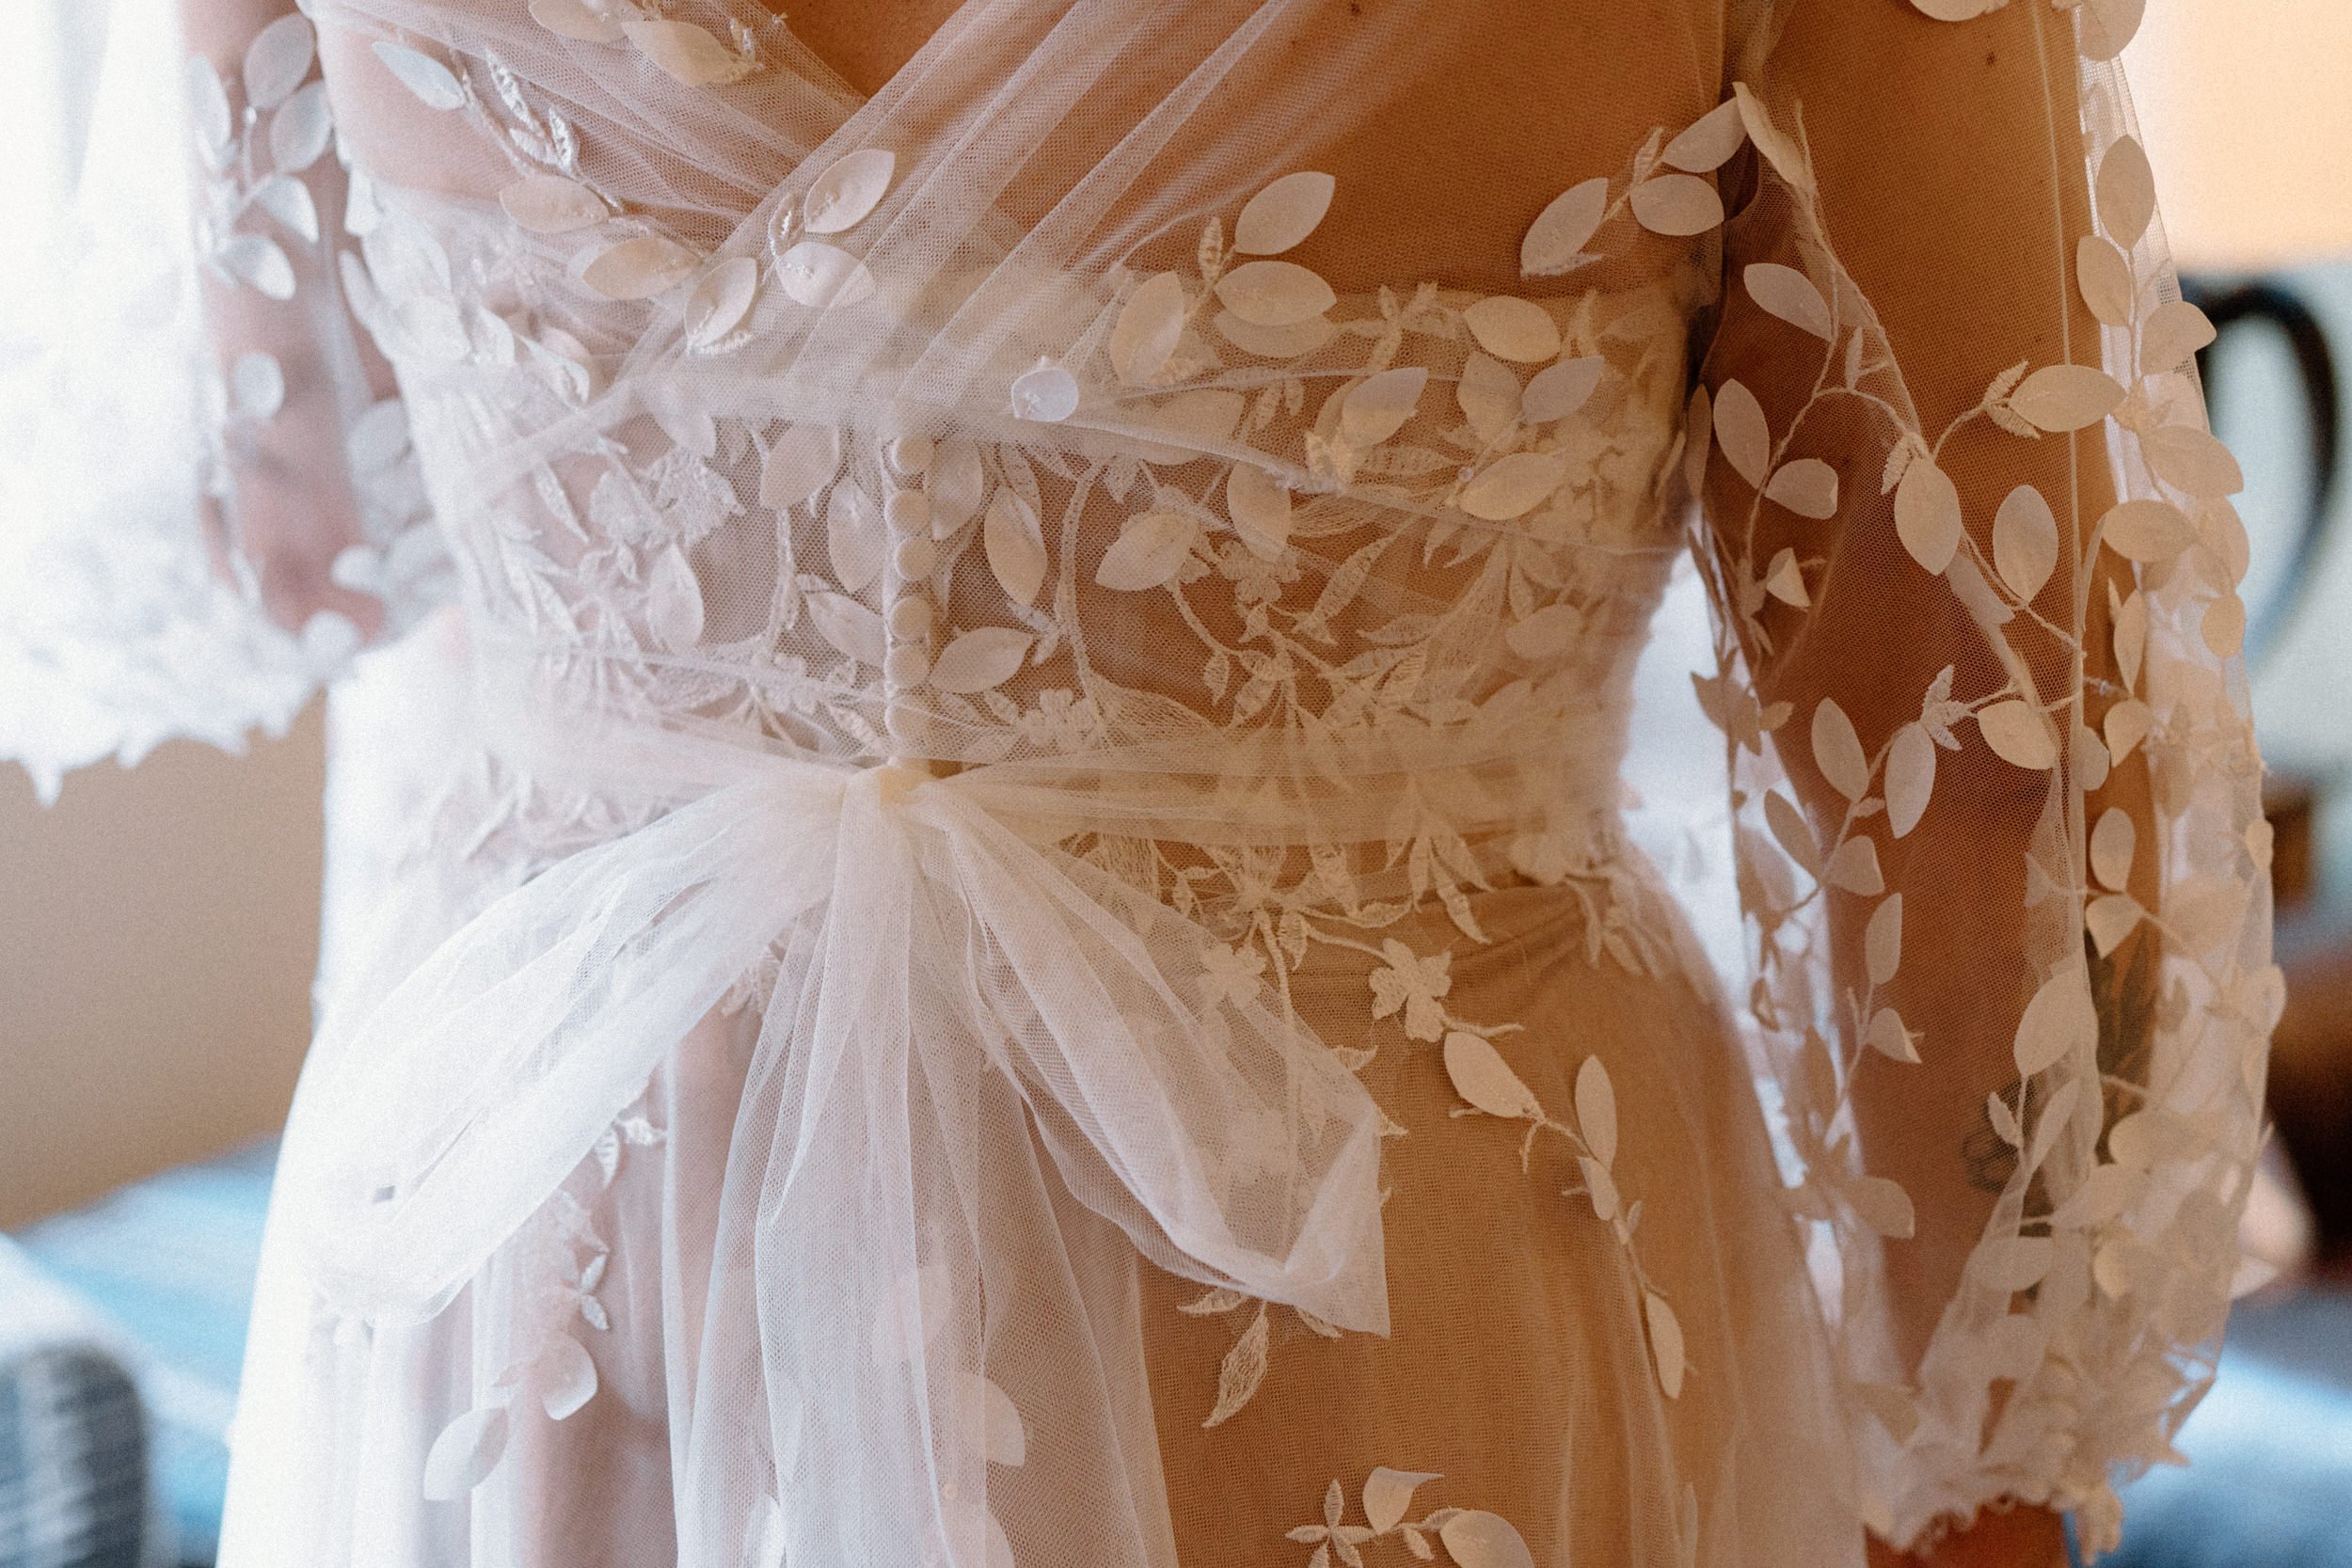 A close up of the buttons and lace of the wedding dress